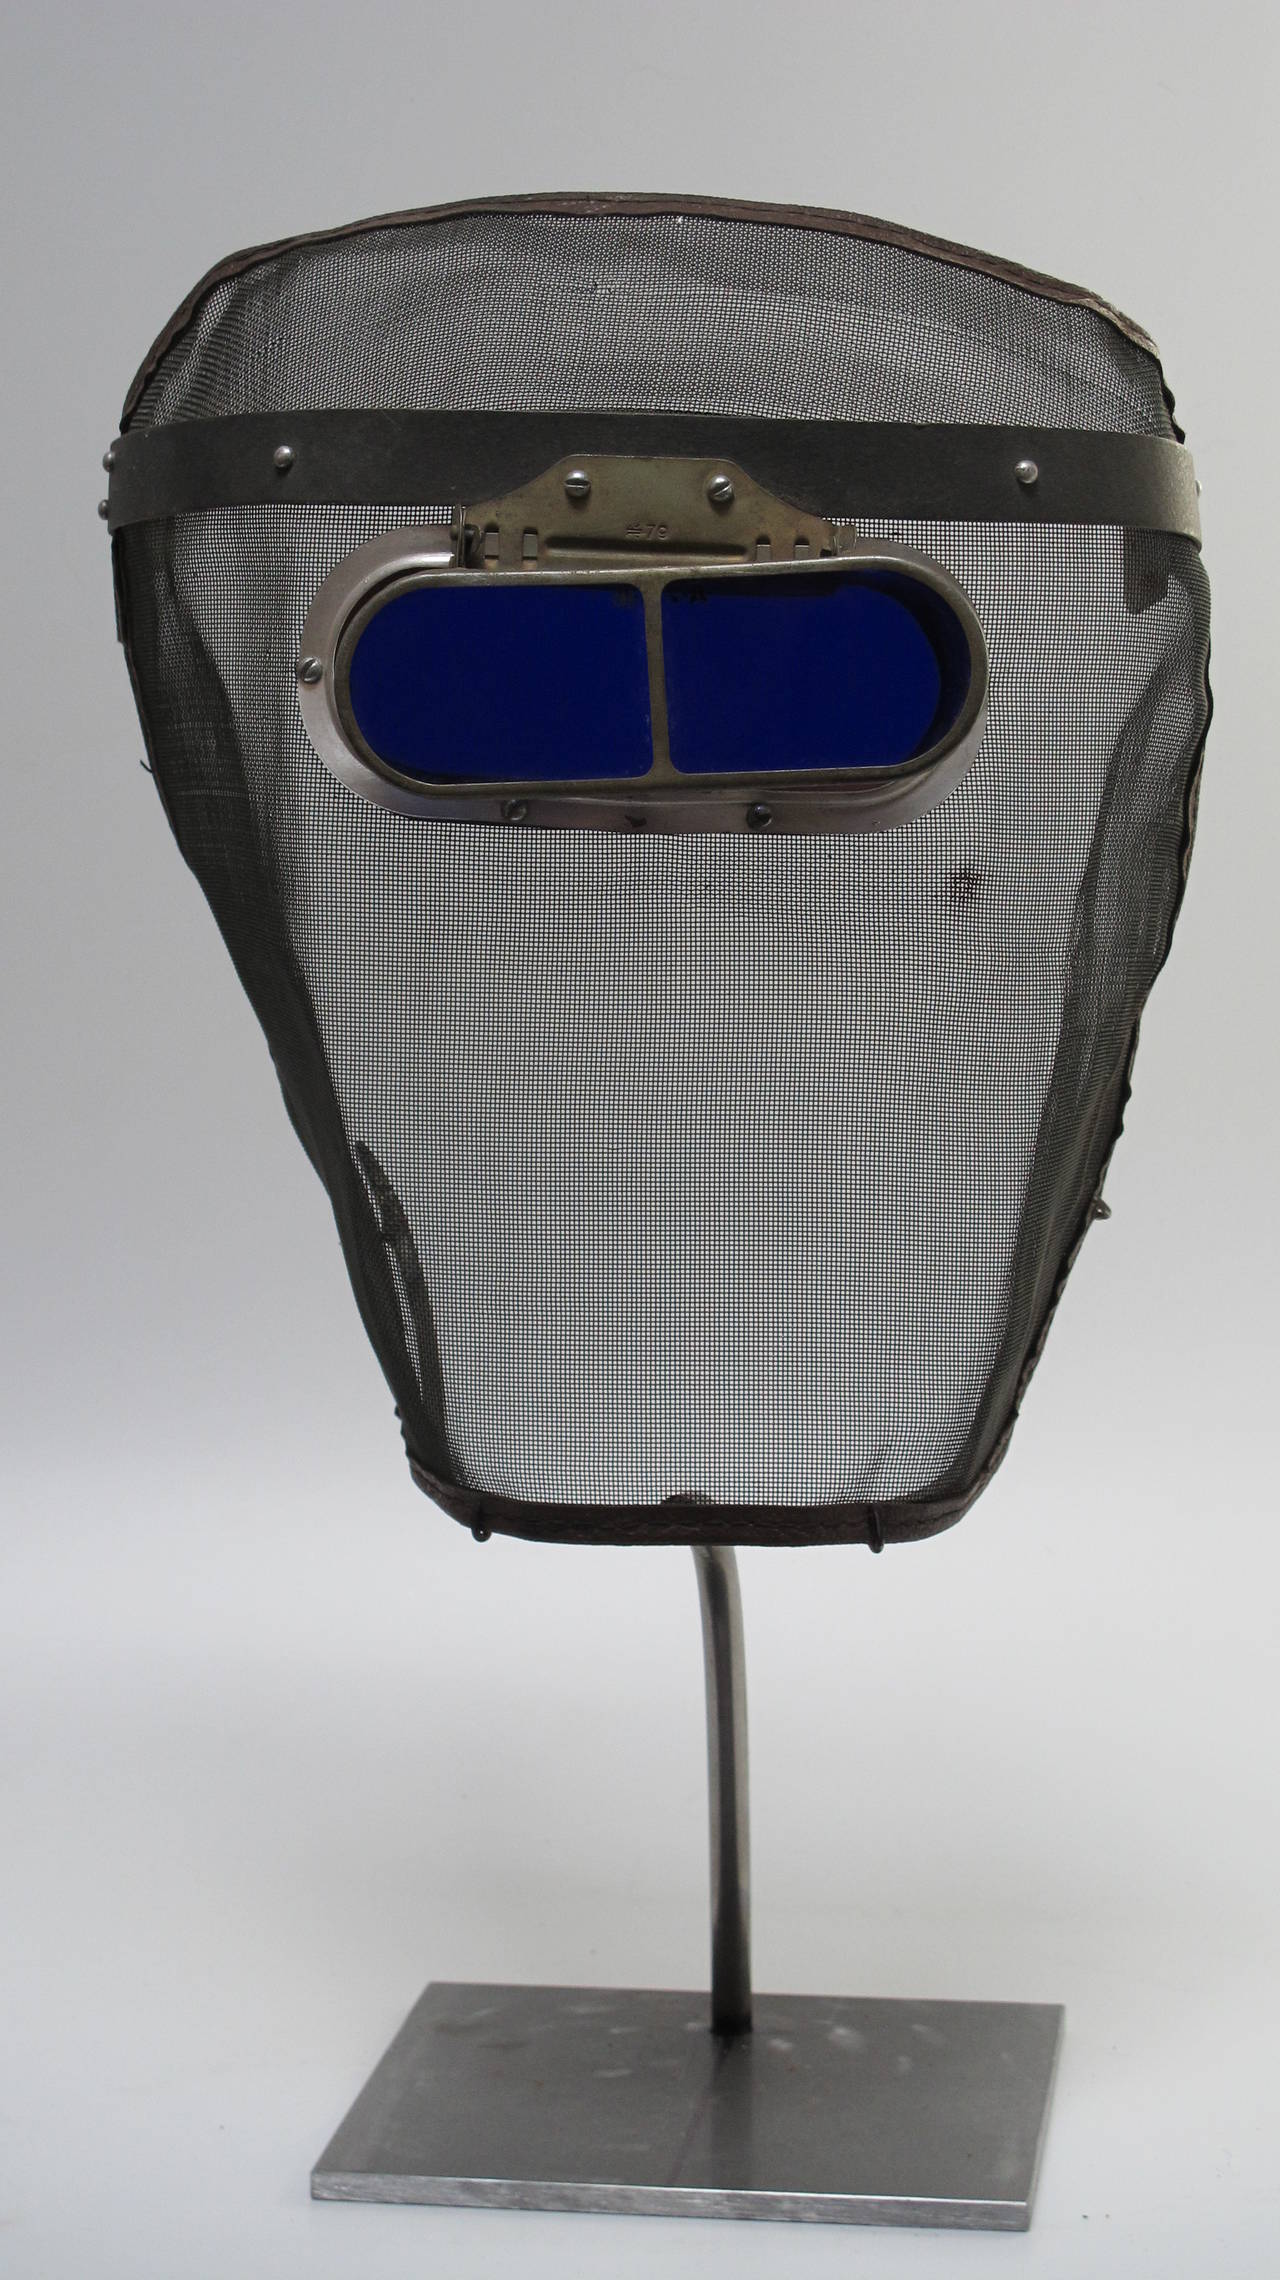 Face protection from hot cinders in tending a coal furnace, the mesh would block most particles and the blue glass would protect the eyes. Mounted as a sculpture and mask on a black metal base. The cobalt blue glass has metal framing and is hinged